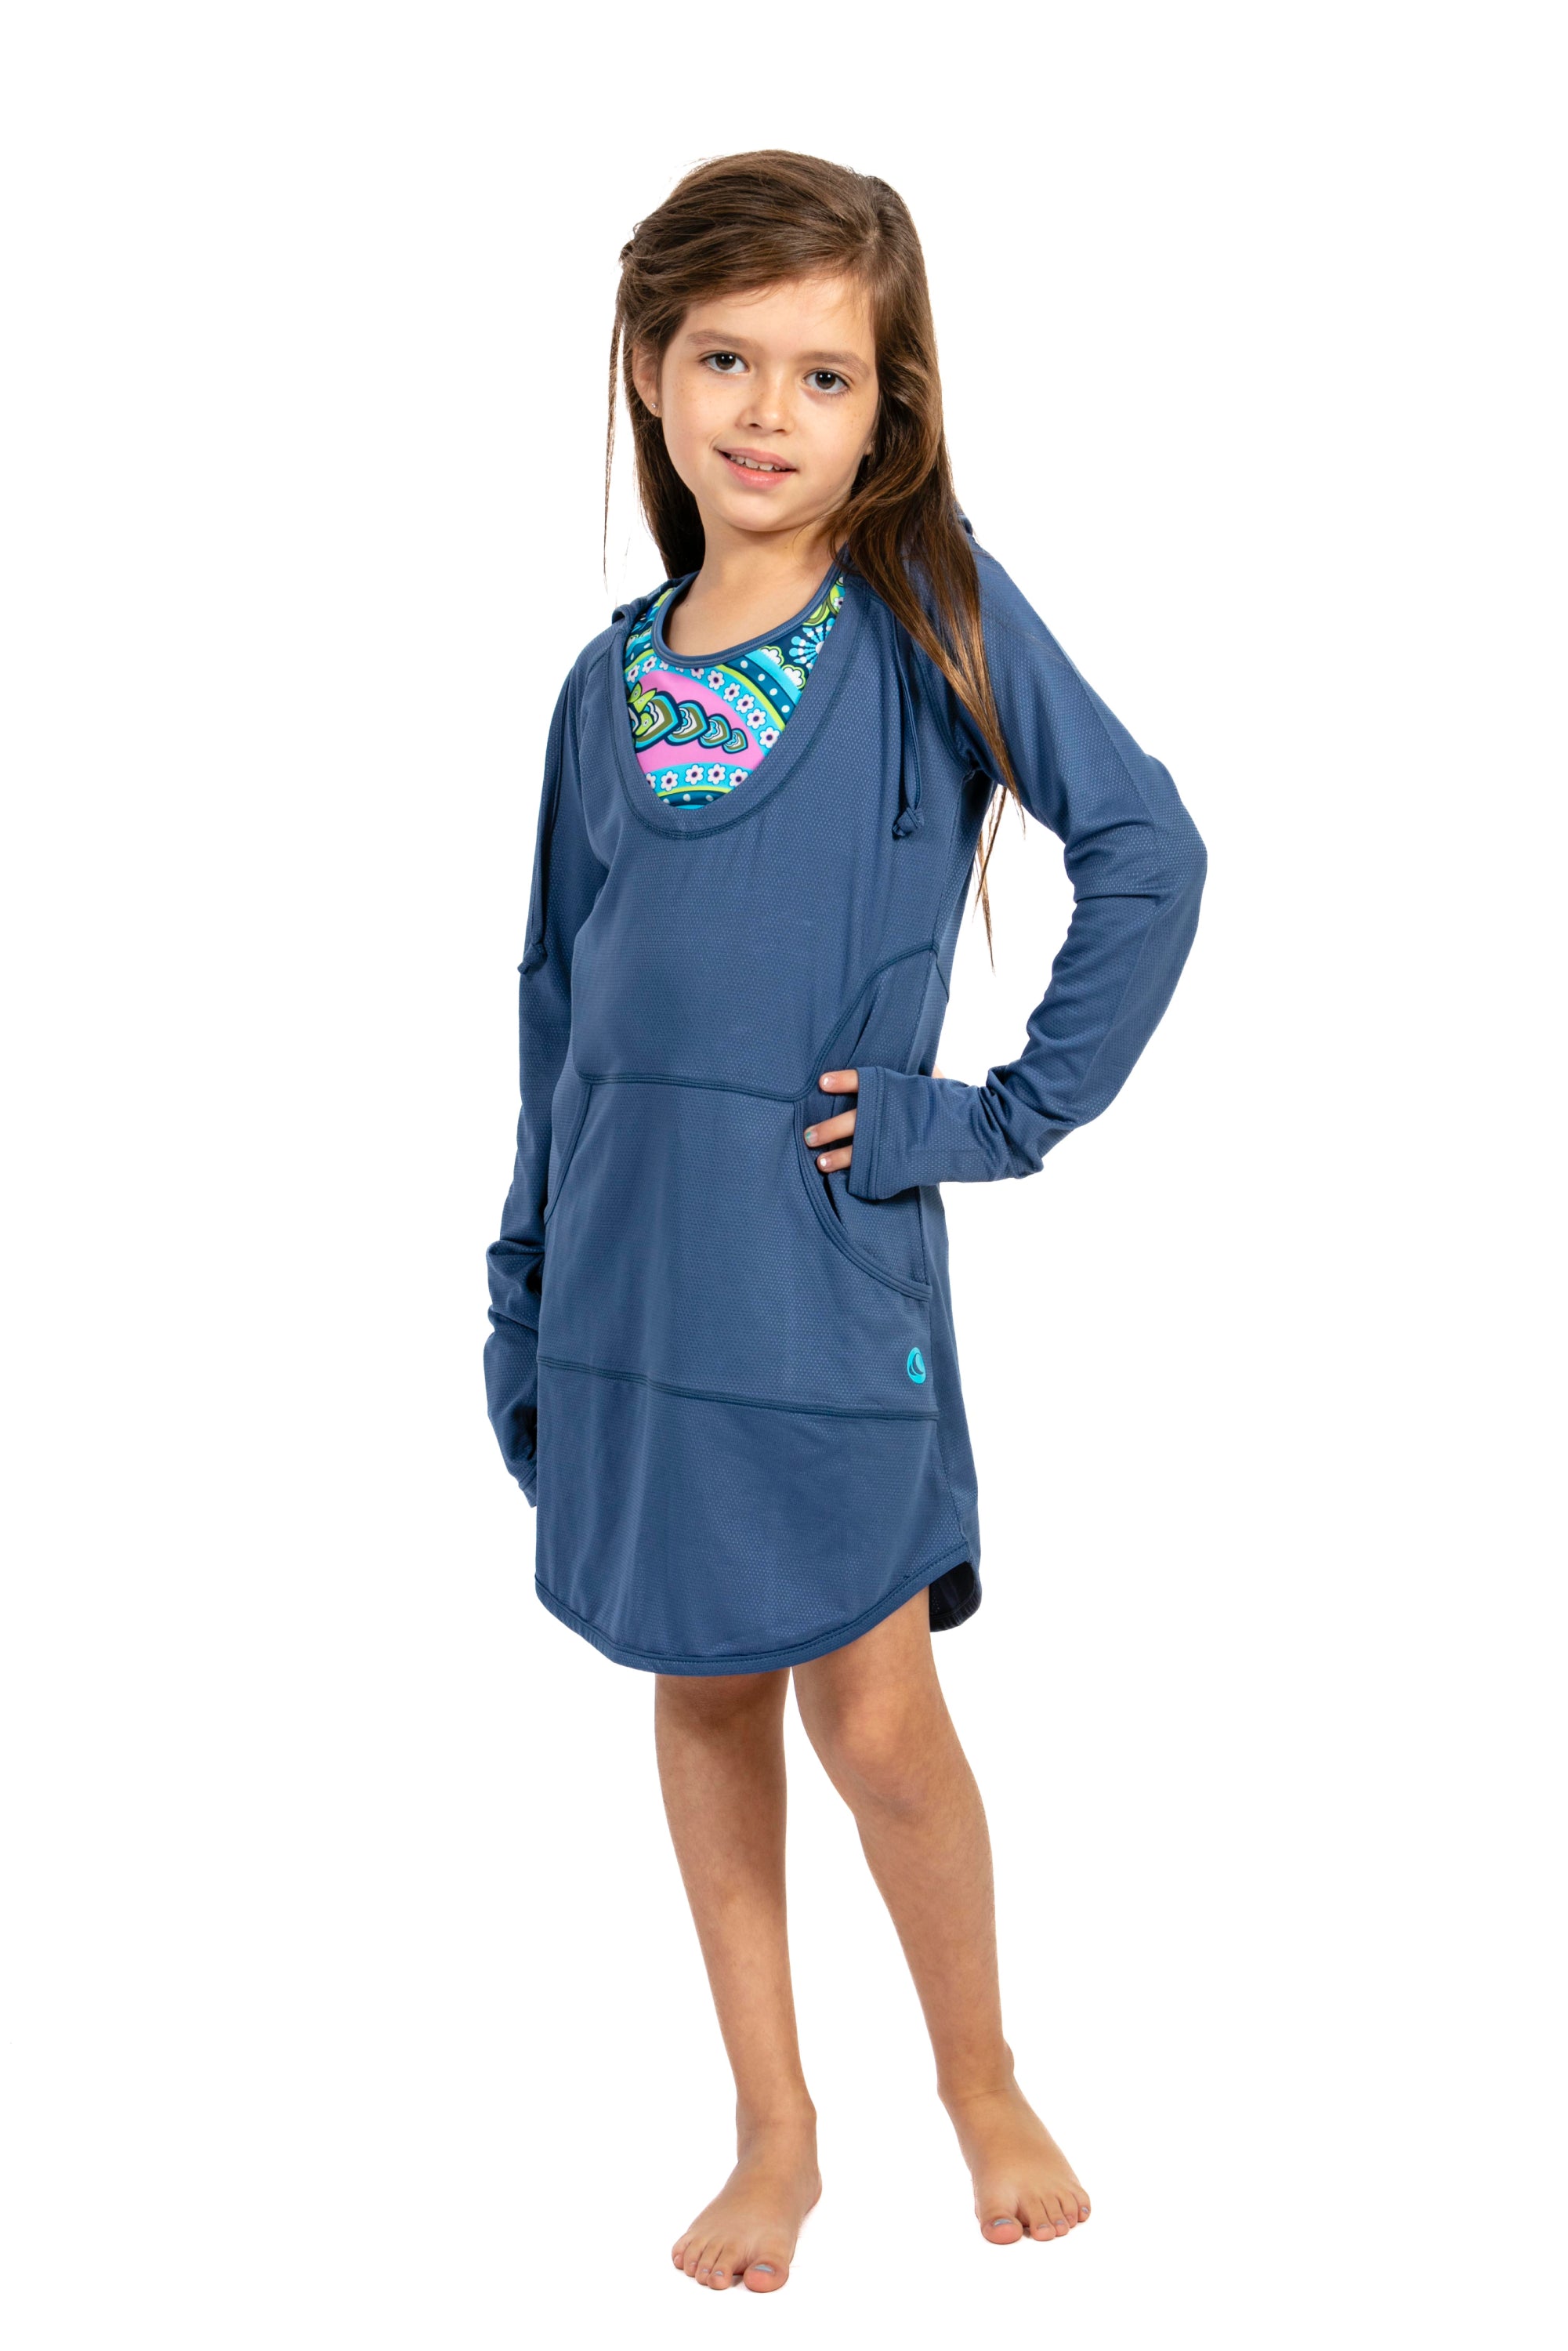 Girls Blue Hoodie Cover Up